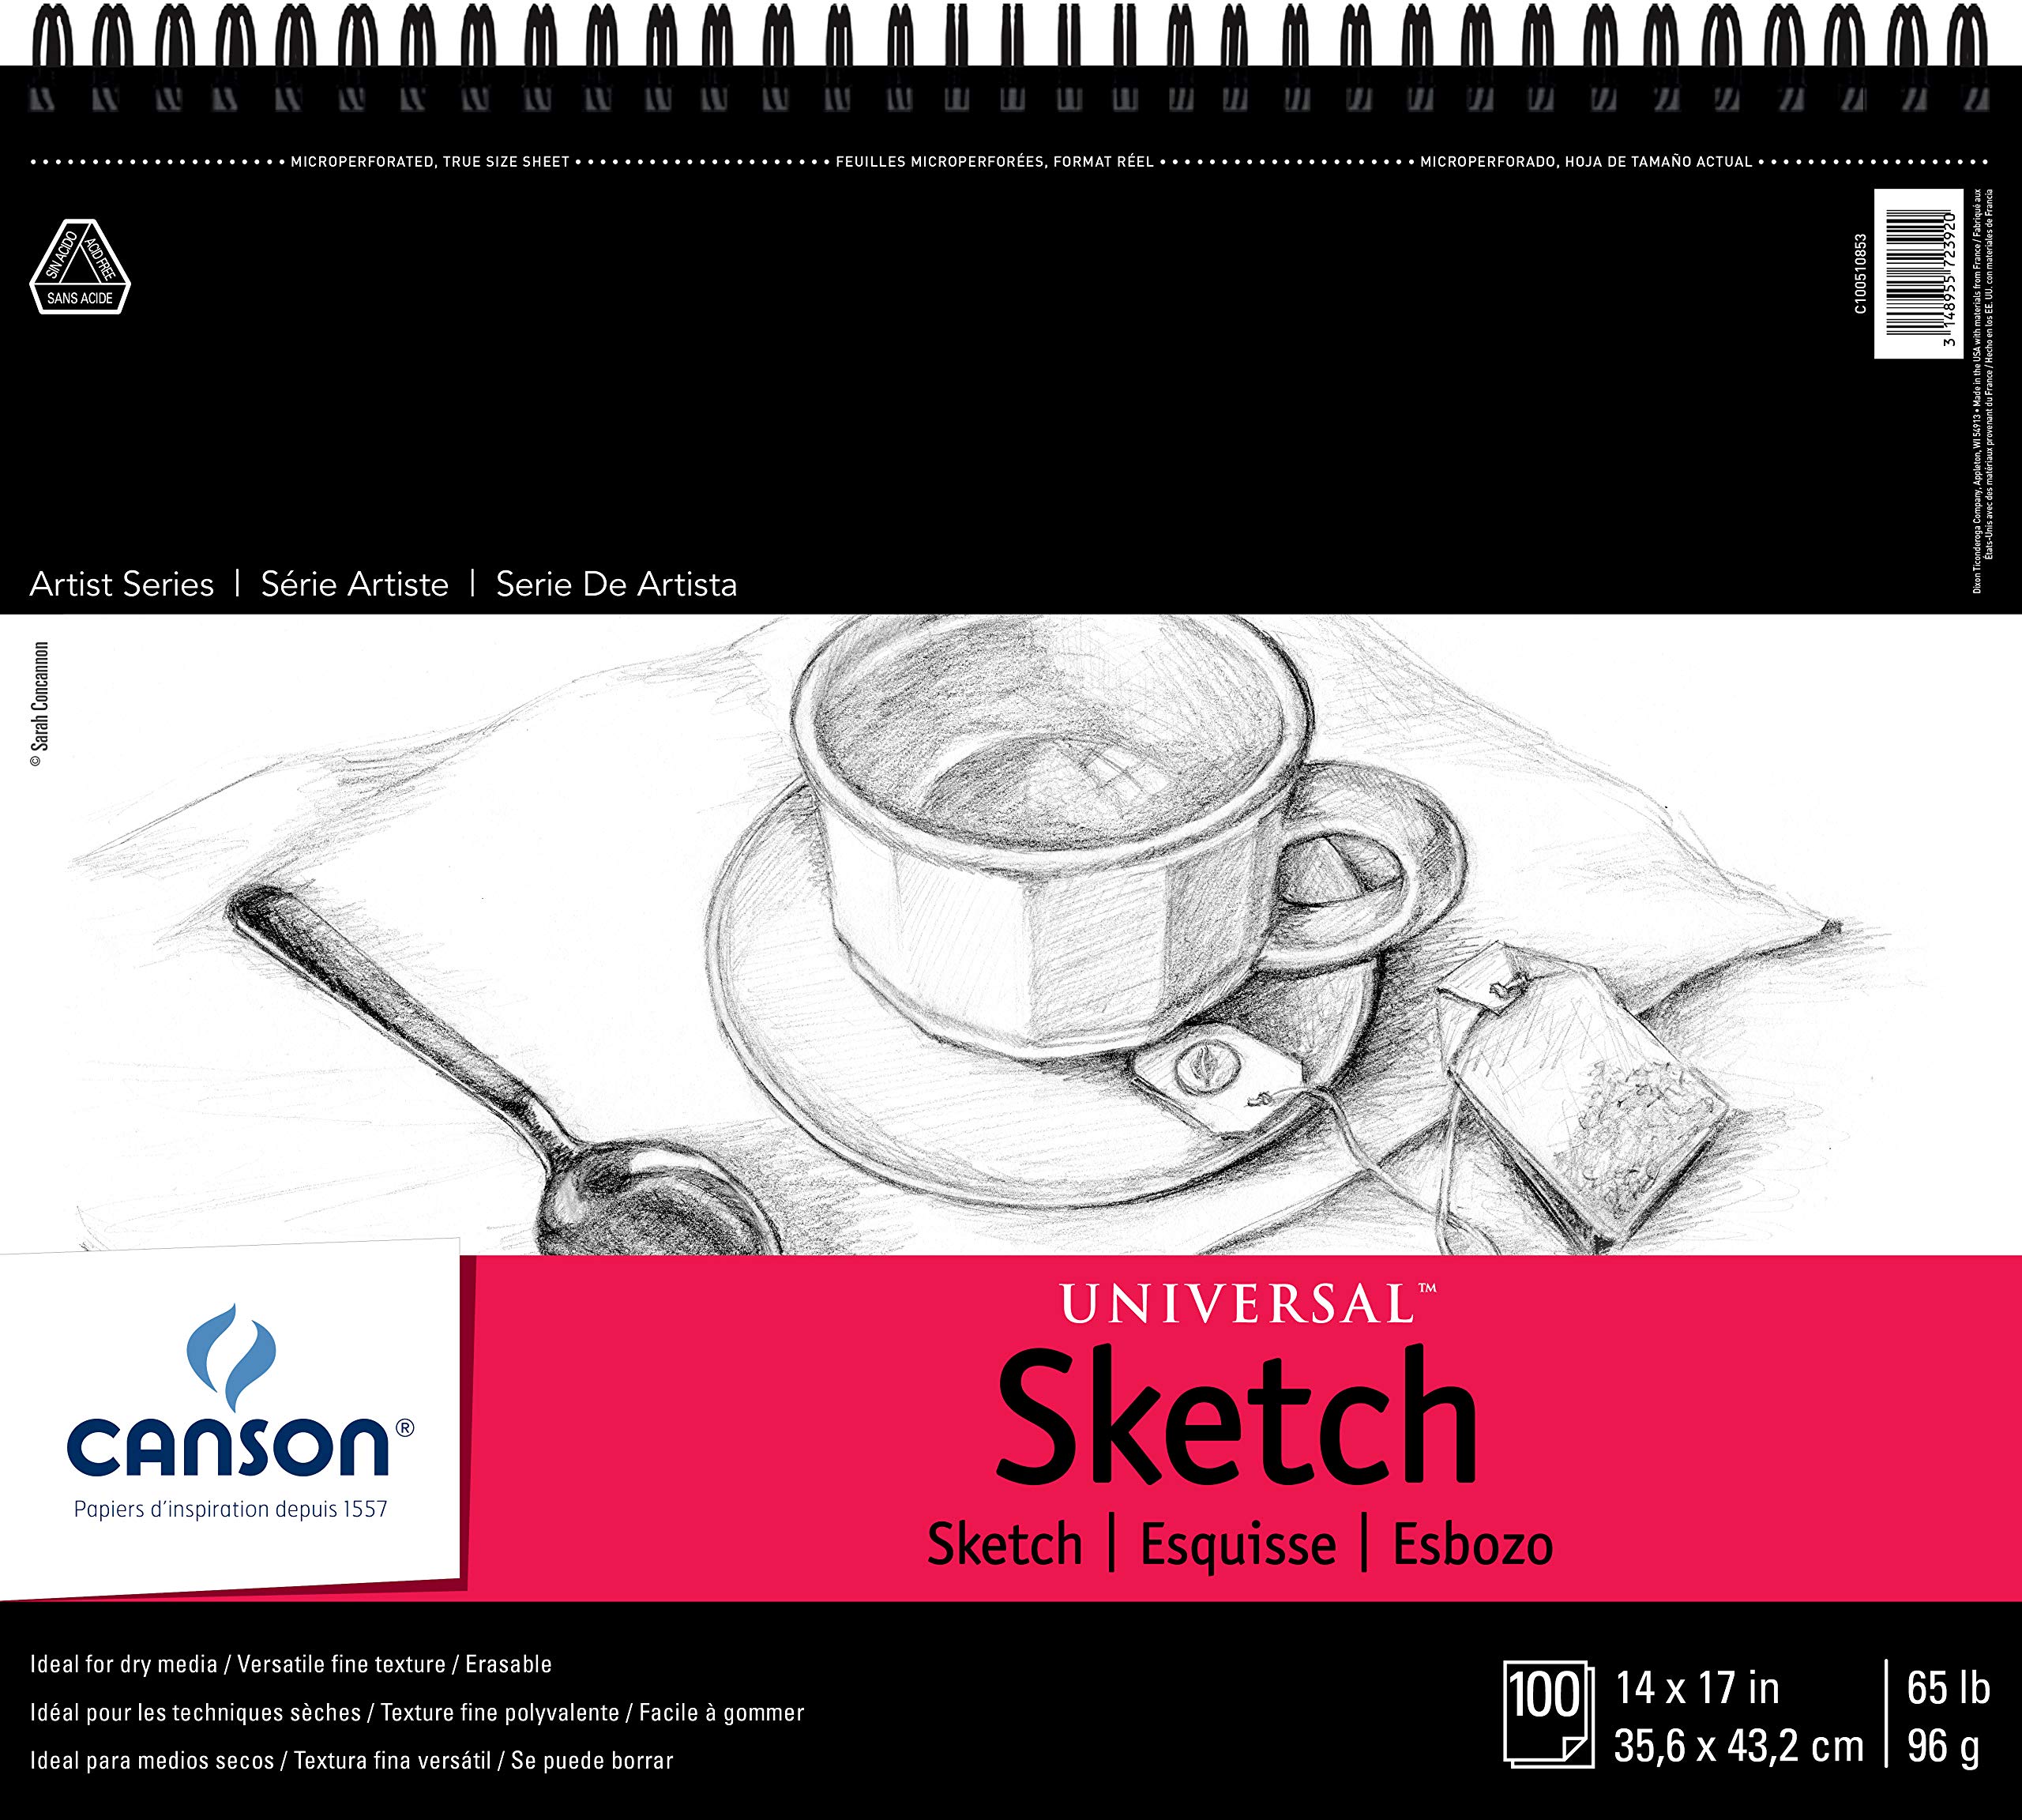 Canson, Art, Canson Xl Mixed Media Paper Pad 98 Lb 9 X 2 Inches 6 Sheets